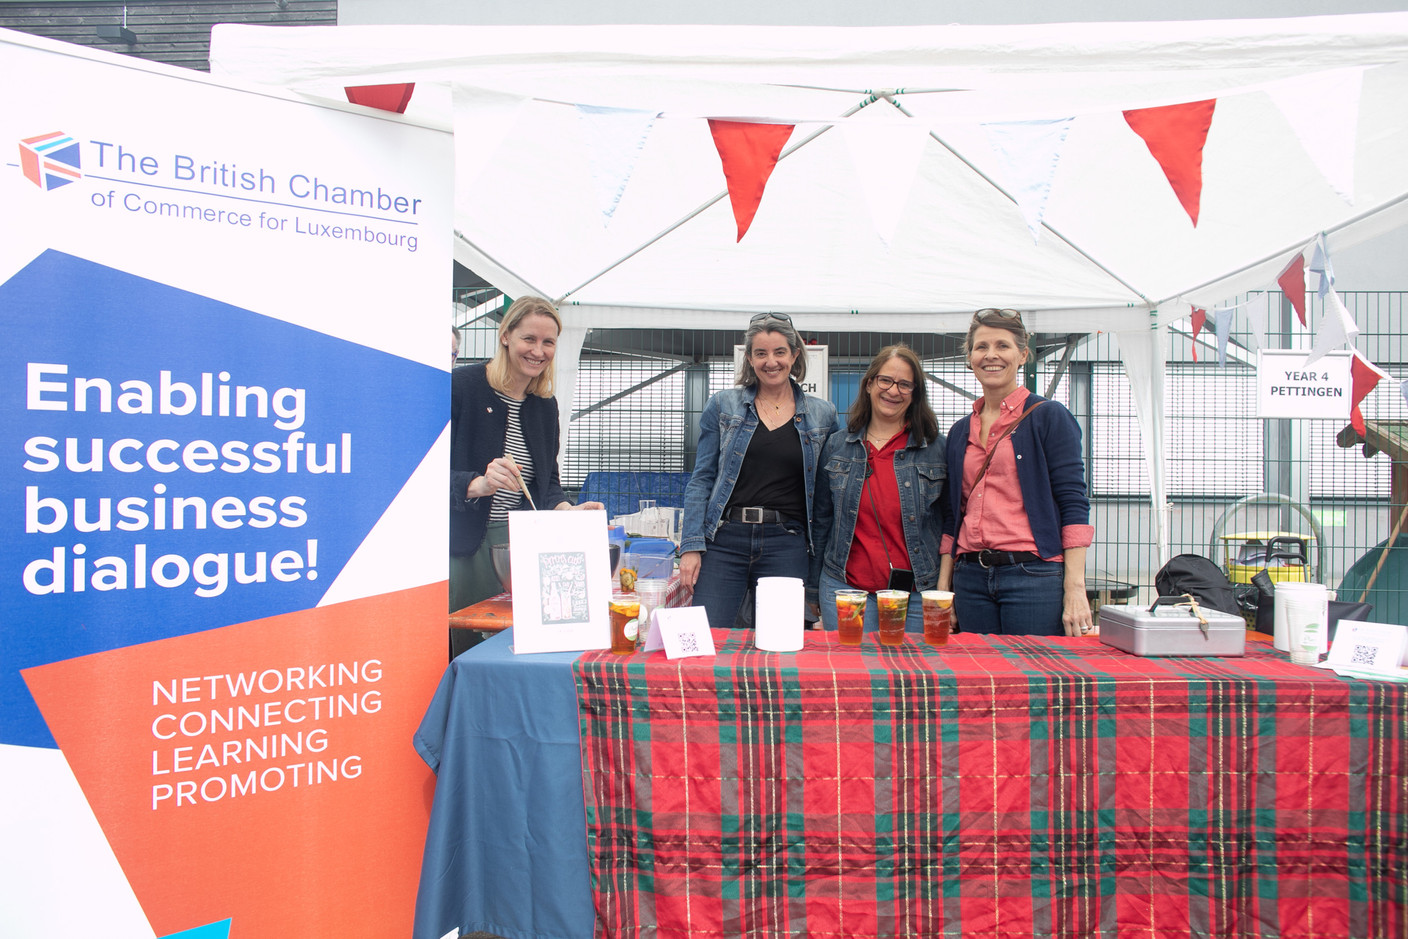 Sara Speed, Louise Edworthy and Rebecca Kellagher of the British Chamber of Commerce for Luxembourg, seen at the BCC stand during a viewing of the coronation service of King Charles III and Queen Camilla at St George’s International School in Luxembourg, 6 May 2023. Photo: Matic Zorman / Maison Moderne